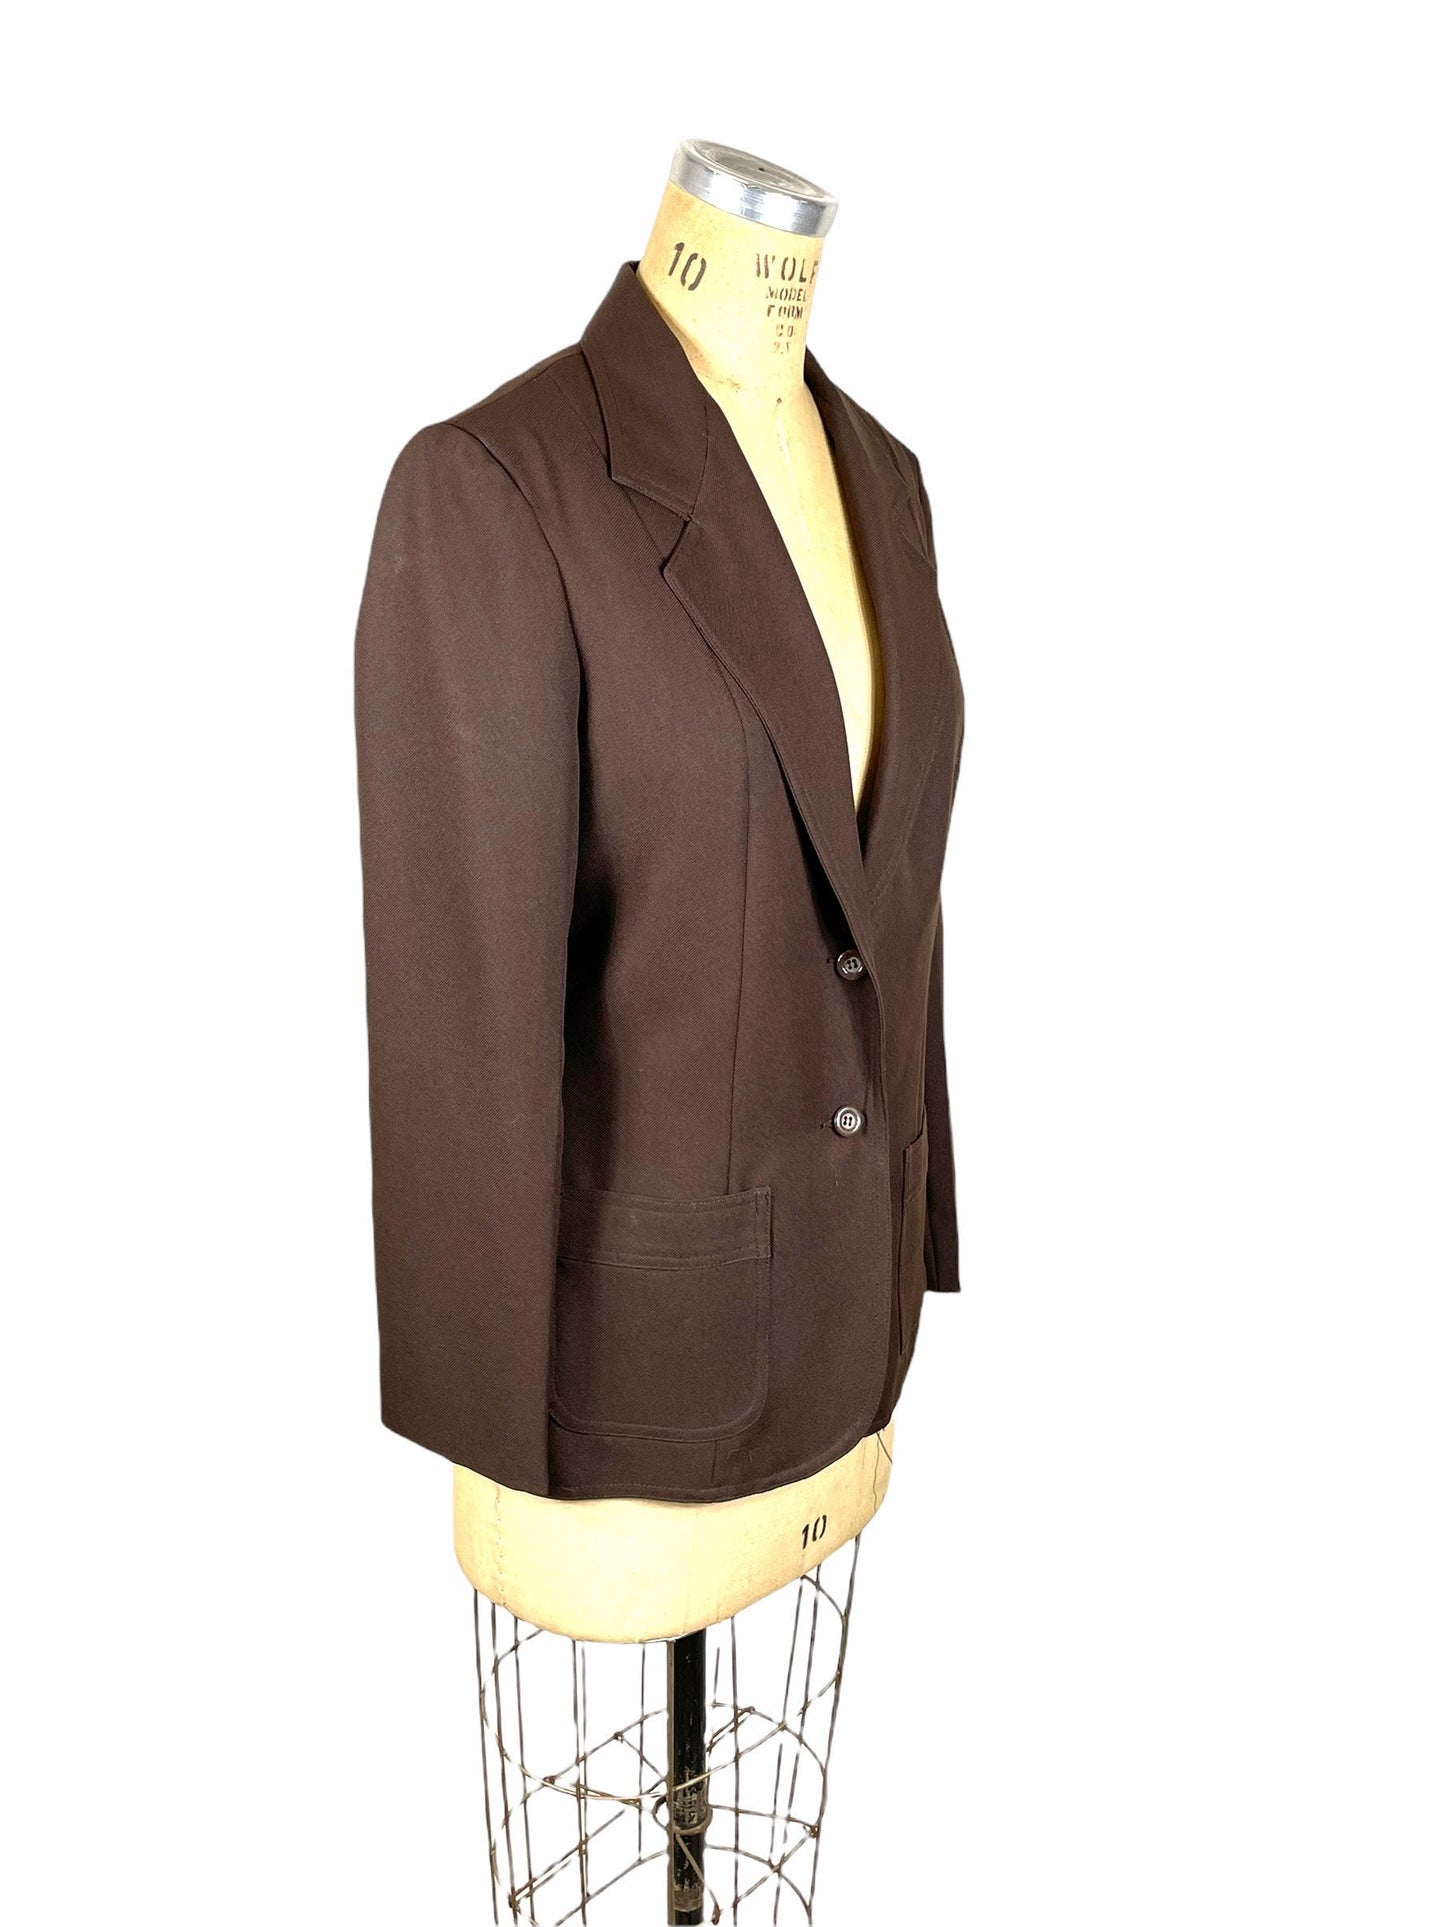 1970s brown blazer by College Town polyester knit Size M